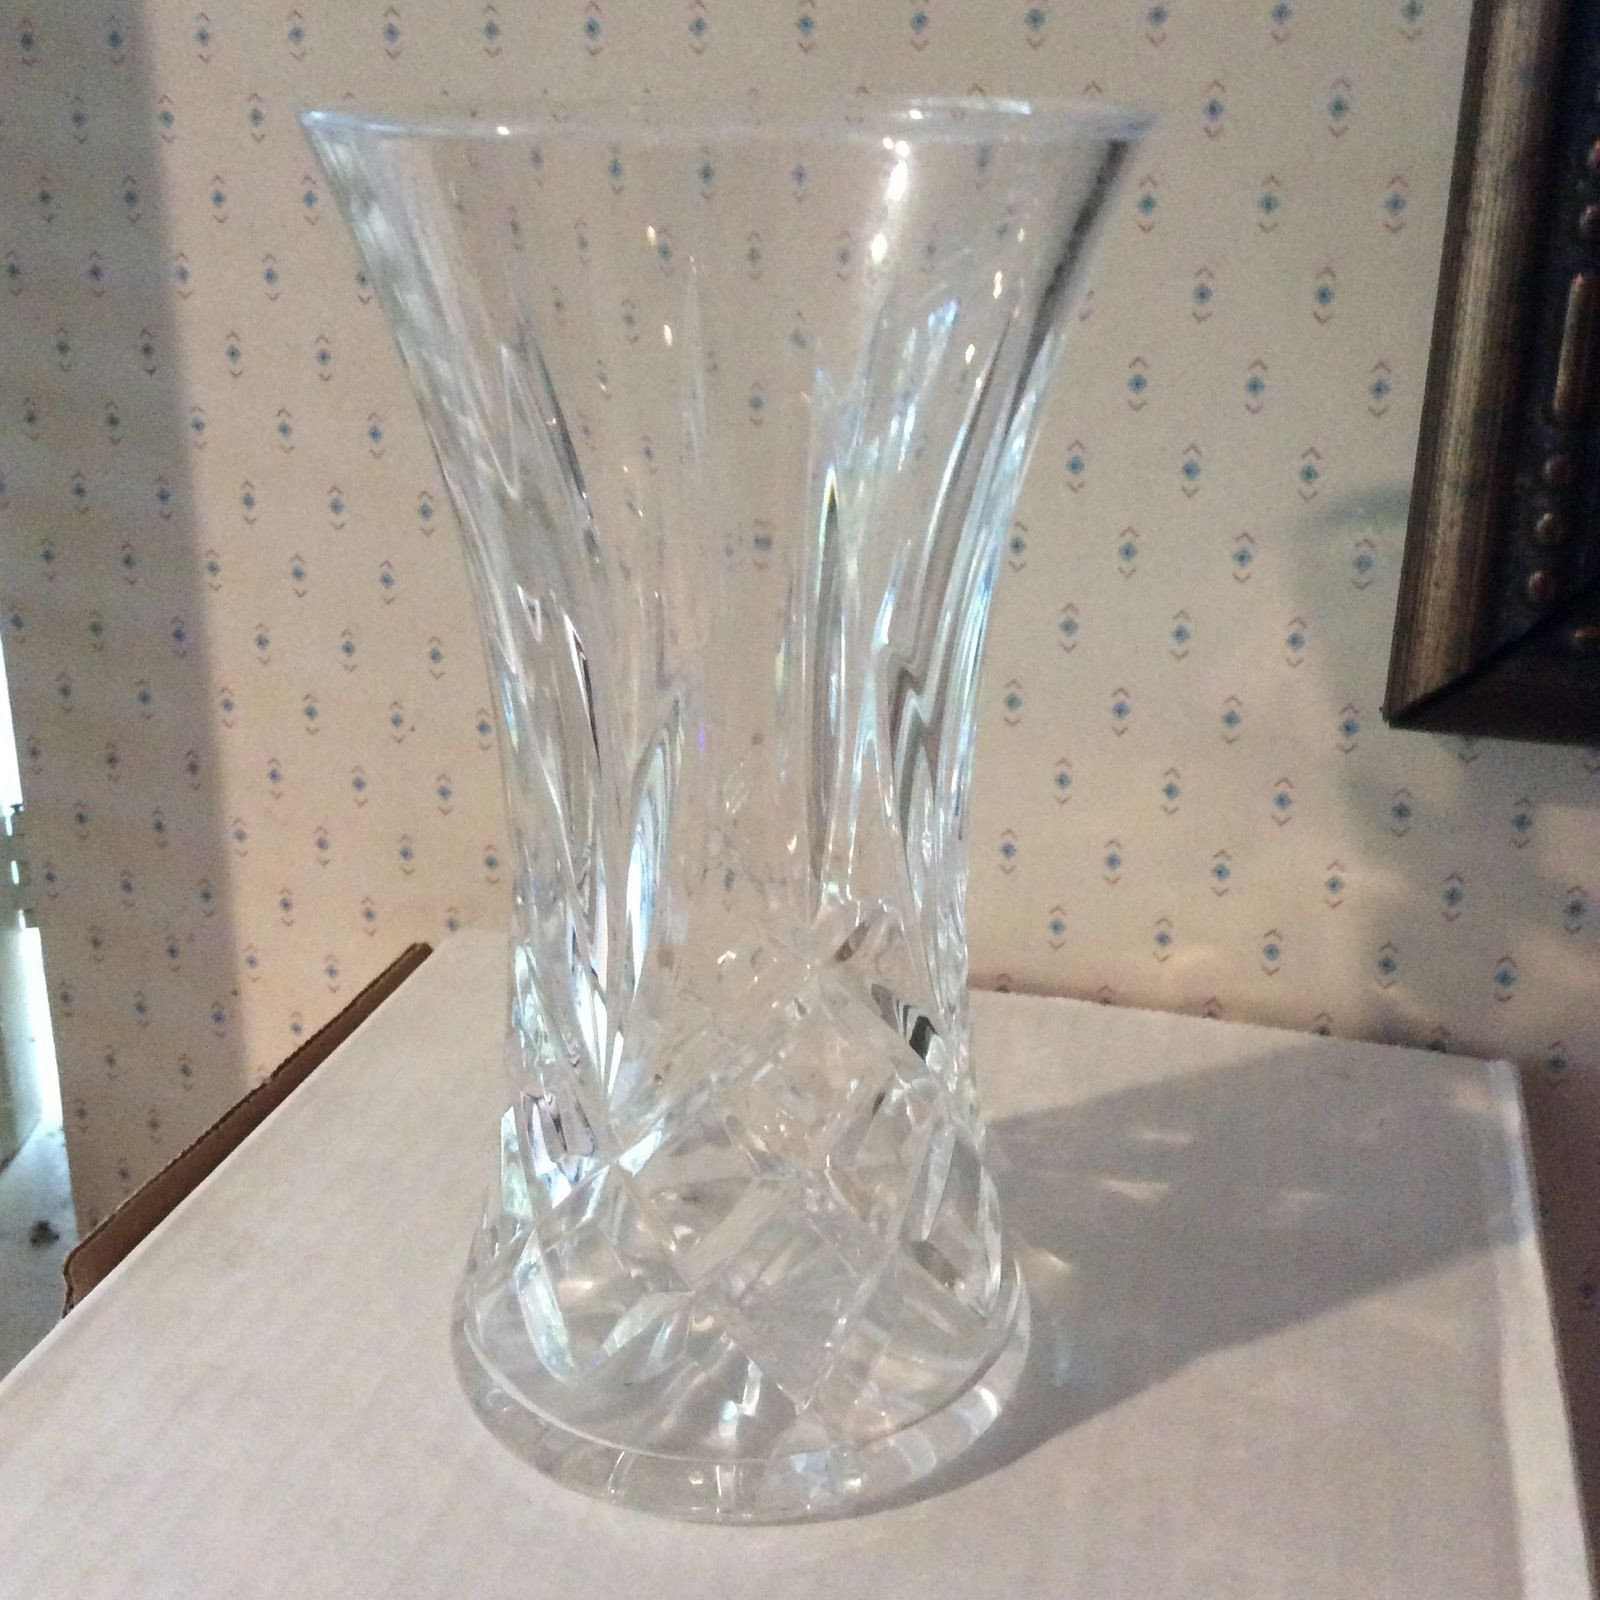 10 Fabulous Waterford Lismore Vase 8 2024 free download waterford lismore vase 8 of vintage waterford crystal araglin vase 7 tall 49 99 picclick regarding 1 of 7only 1 available